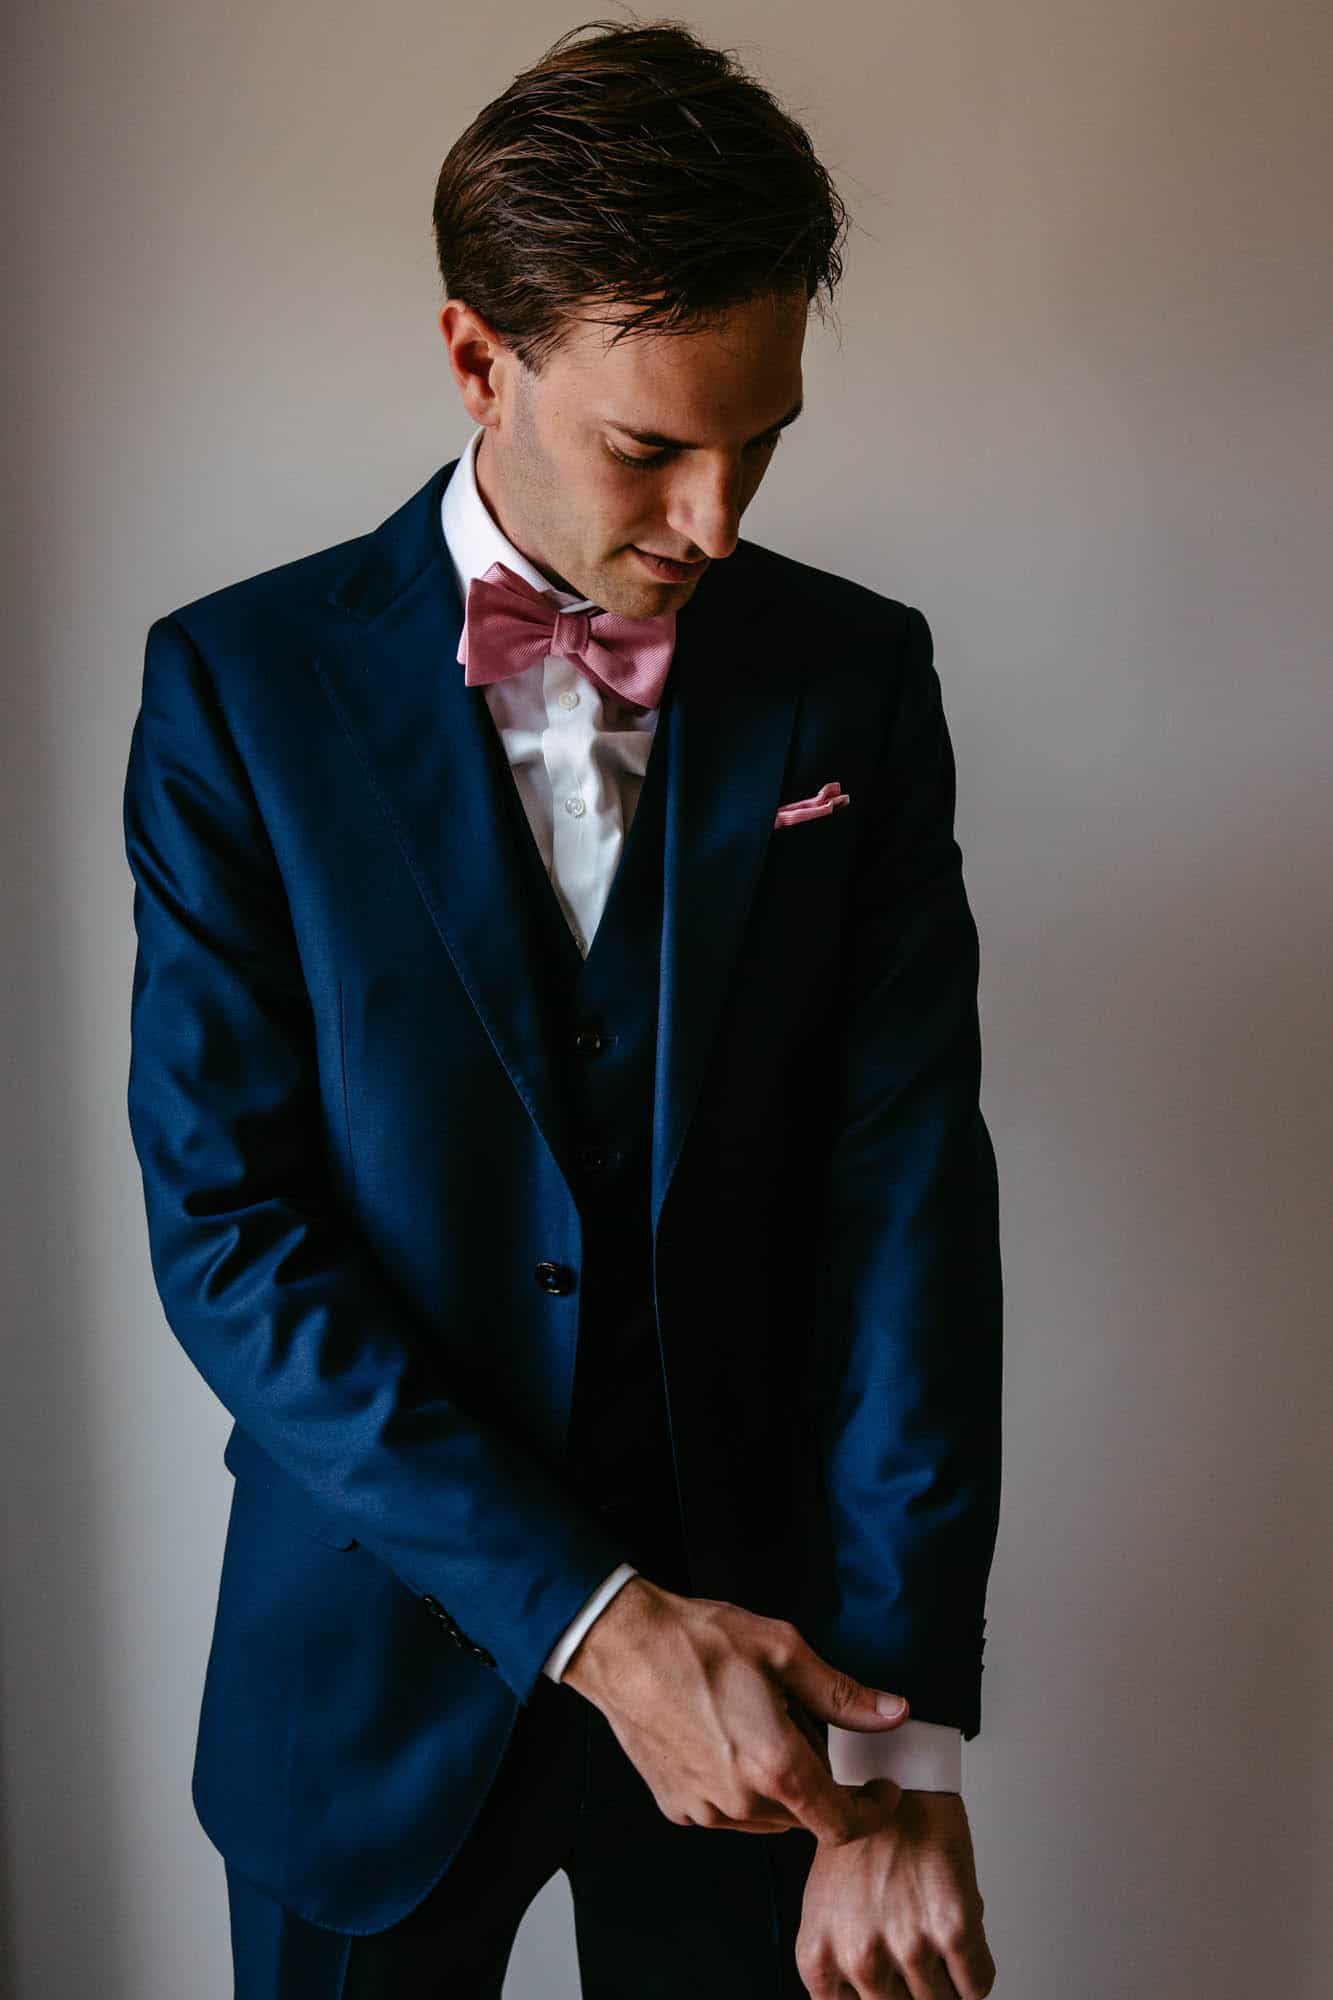 A man in a blue suit with a pink bow tie.